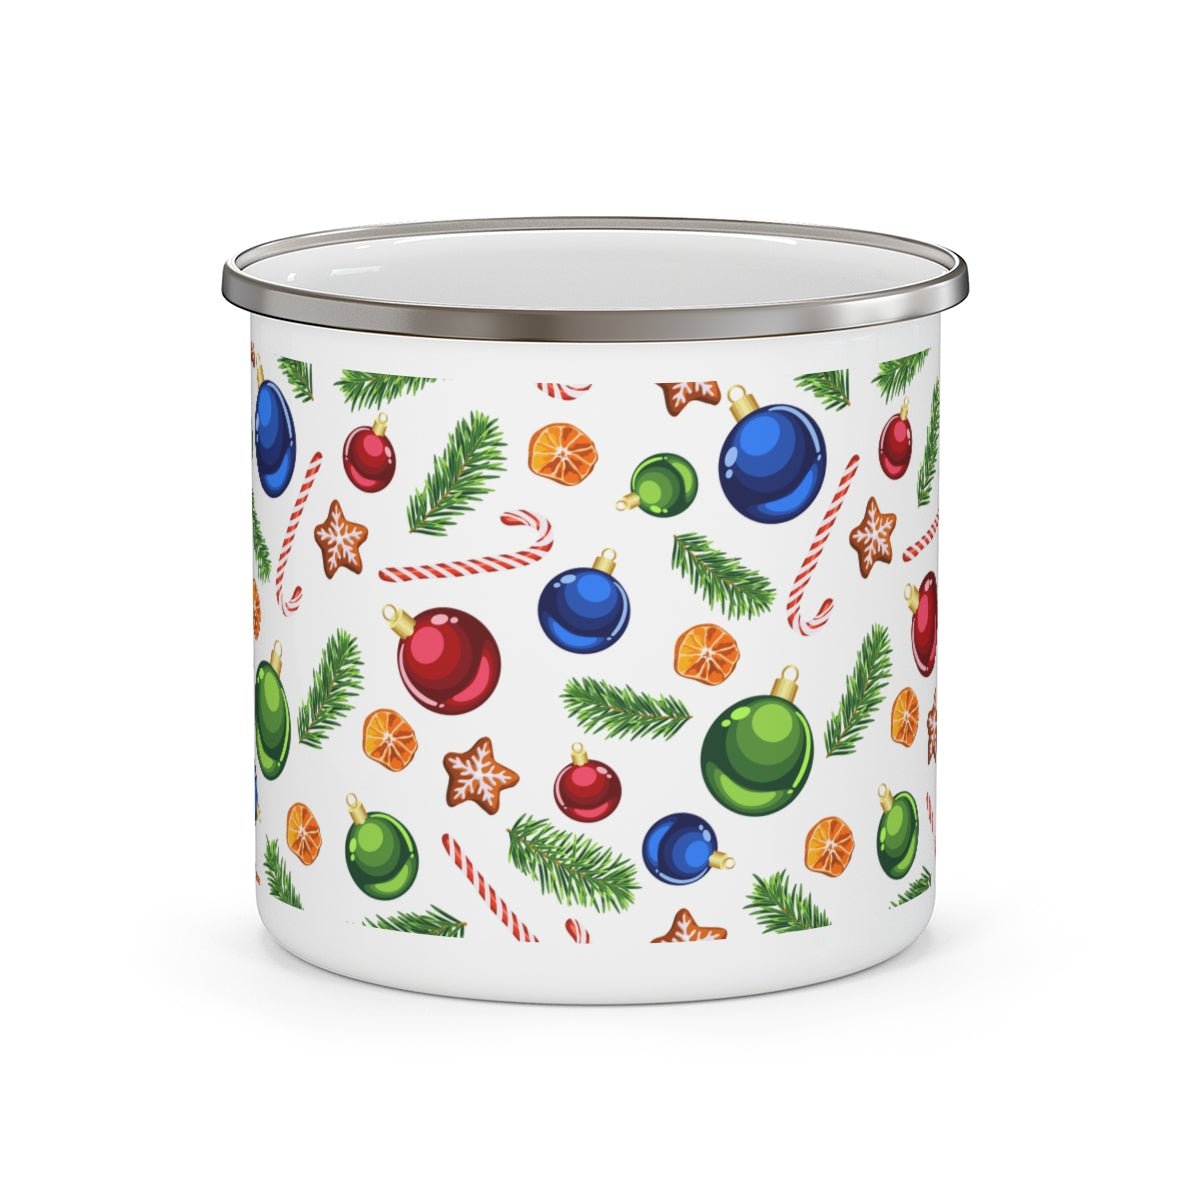 Candy Canes and Ornaments Stainless Steel Camping Mug - Puffin Lime